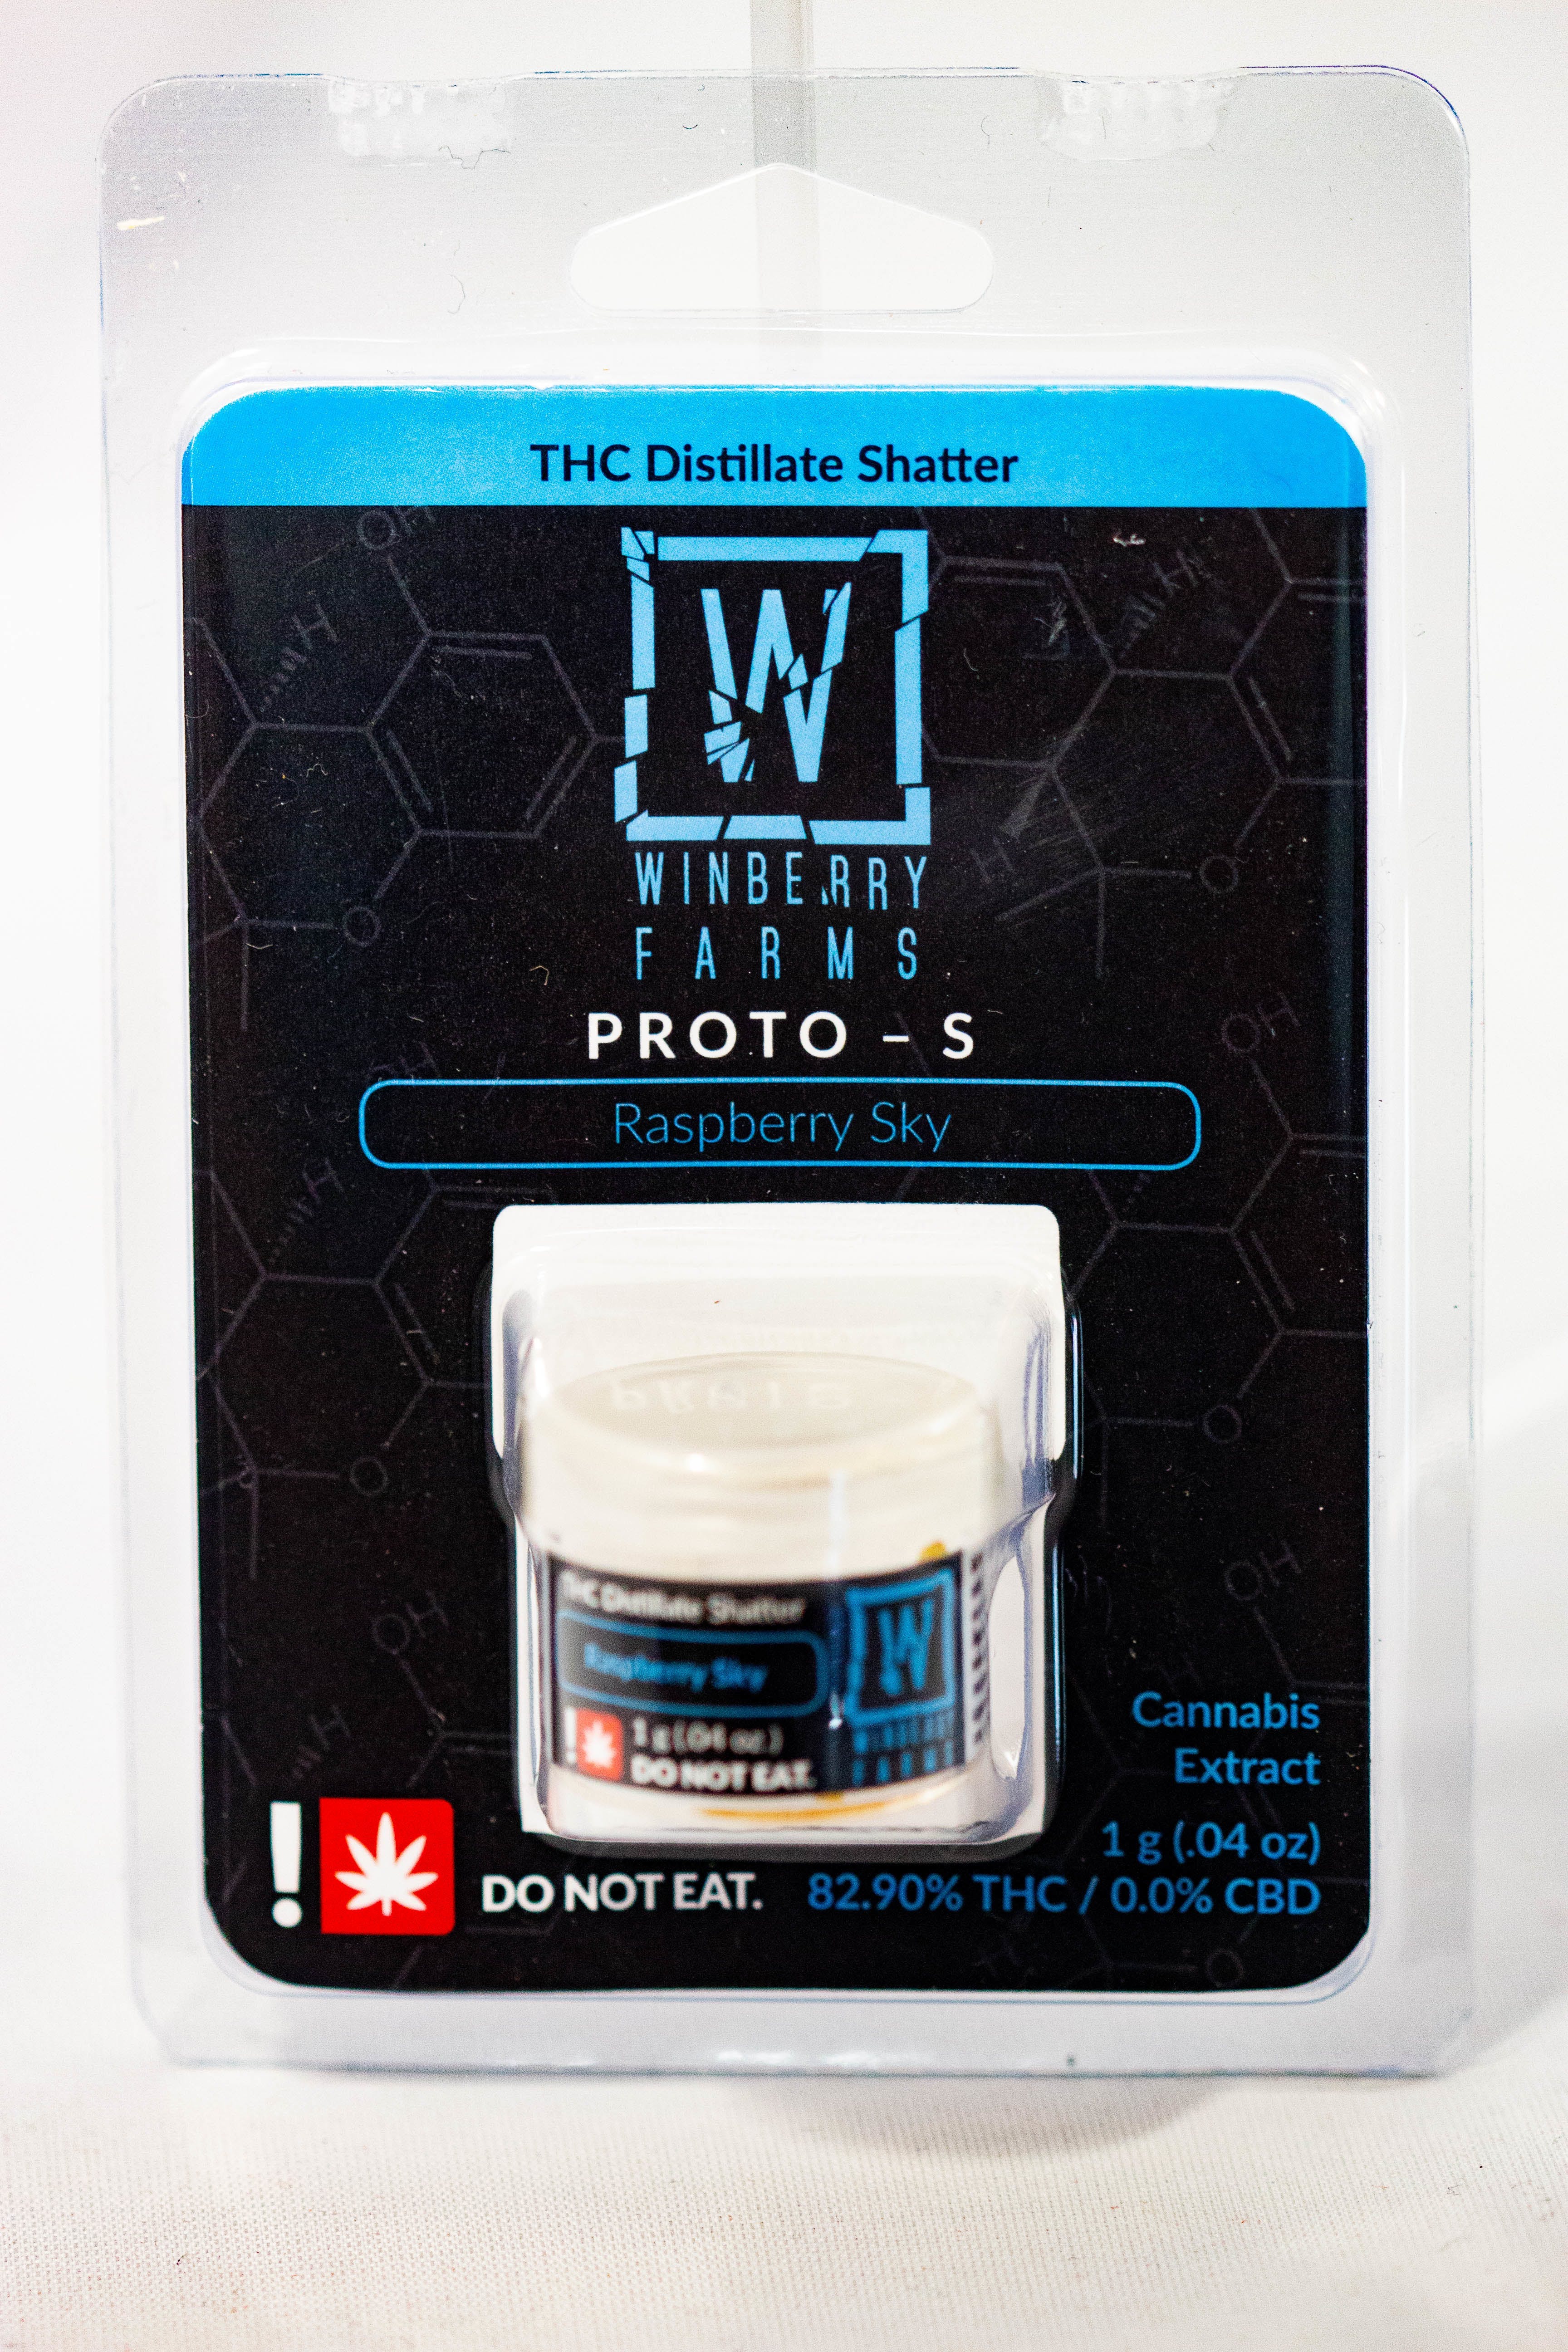 wax-raspberry-sky-proto-s-distillate-shatter-by-winberry-farms